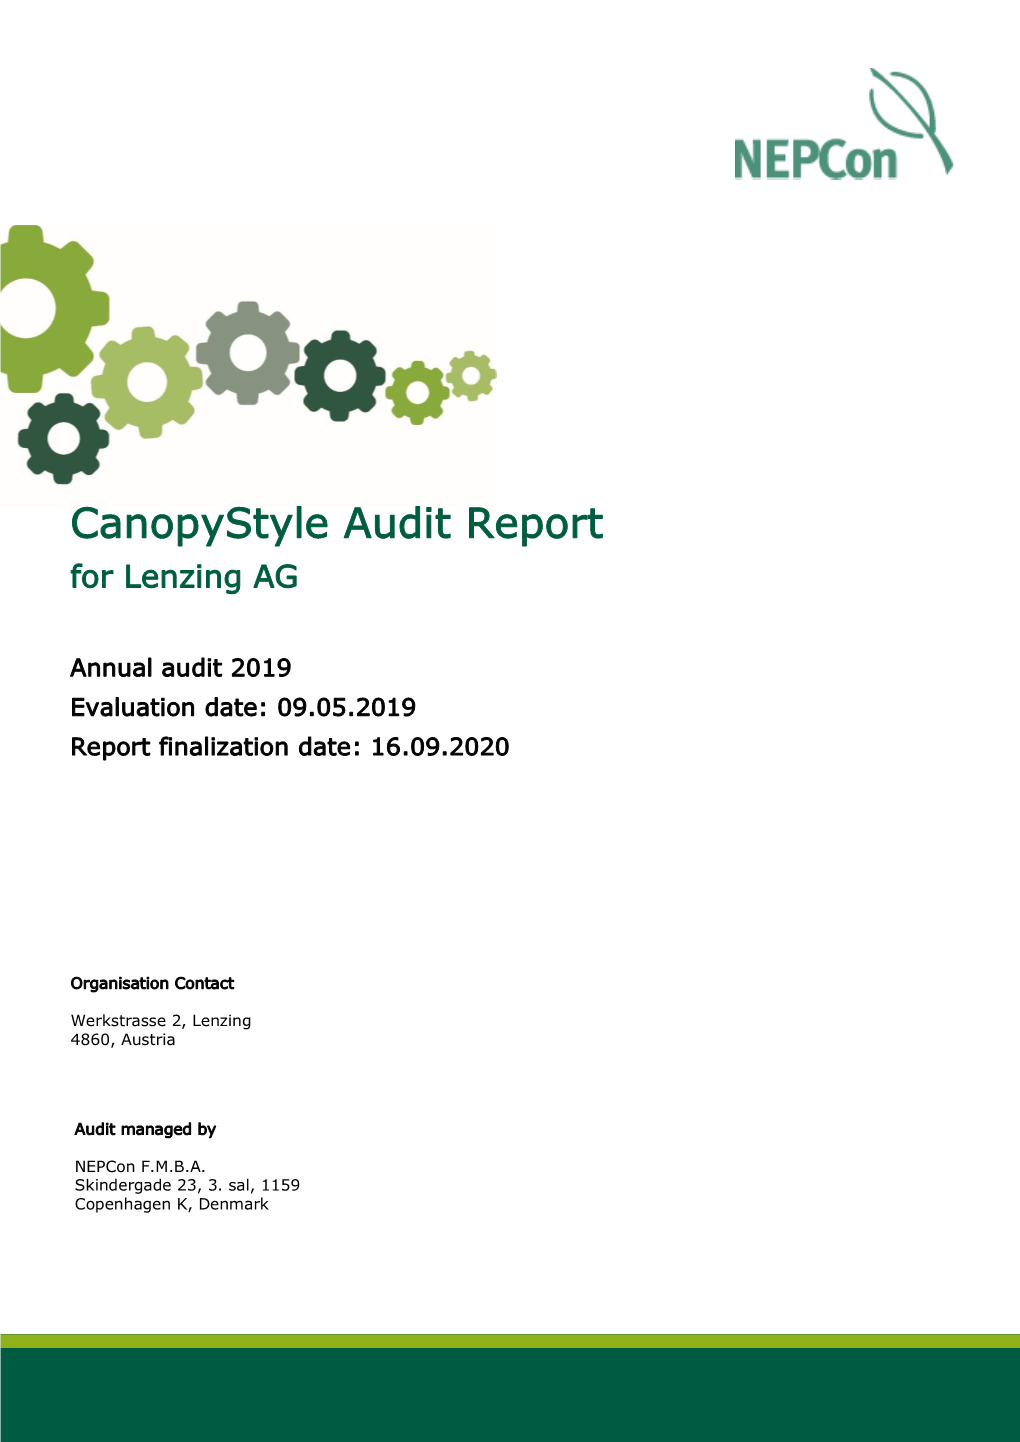 Canopystyle Audit Report for Lenzing AG